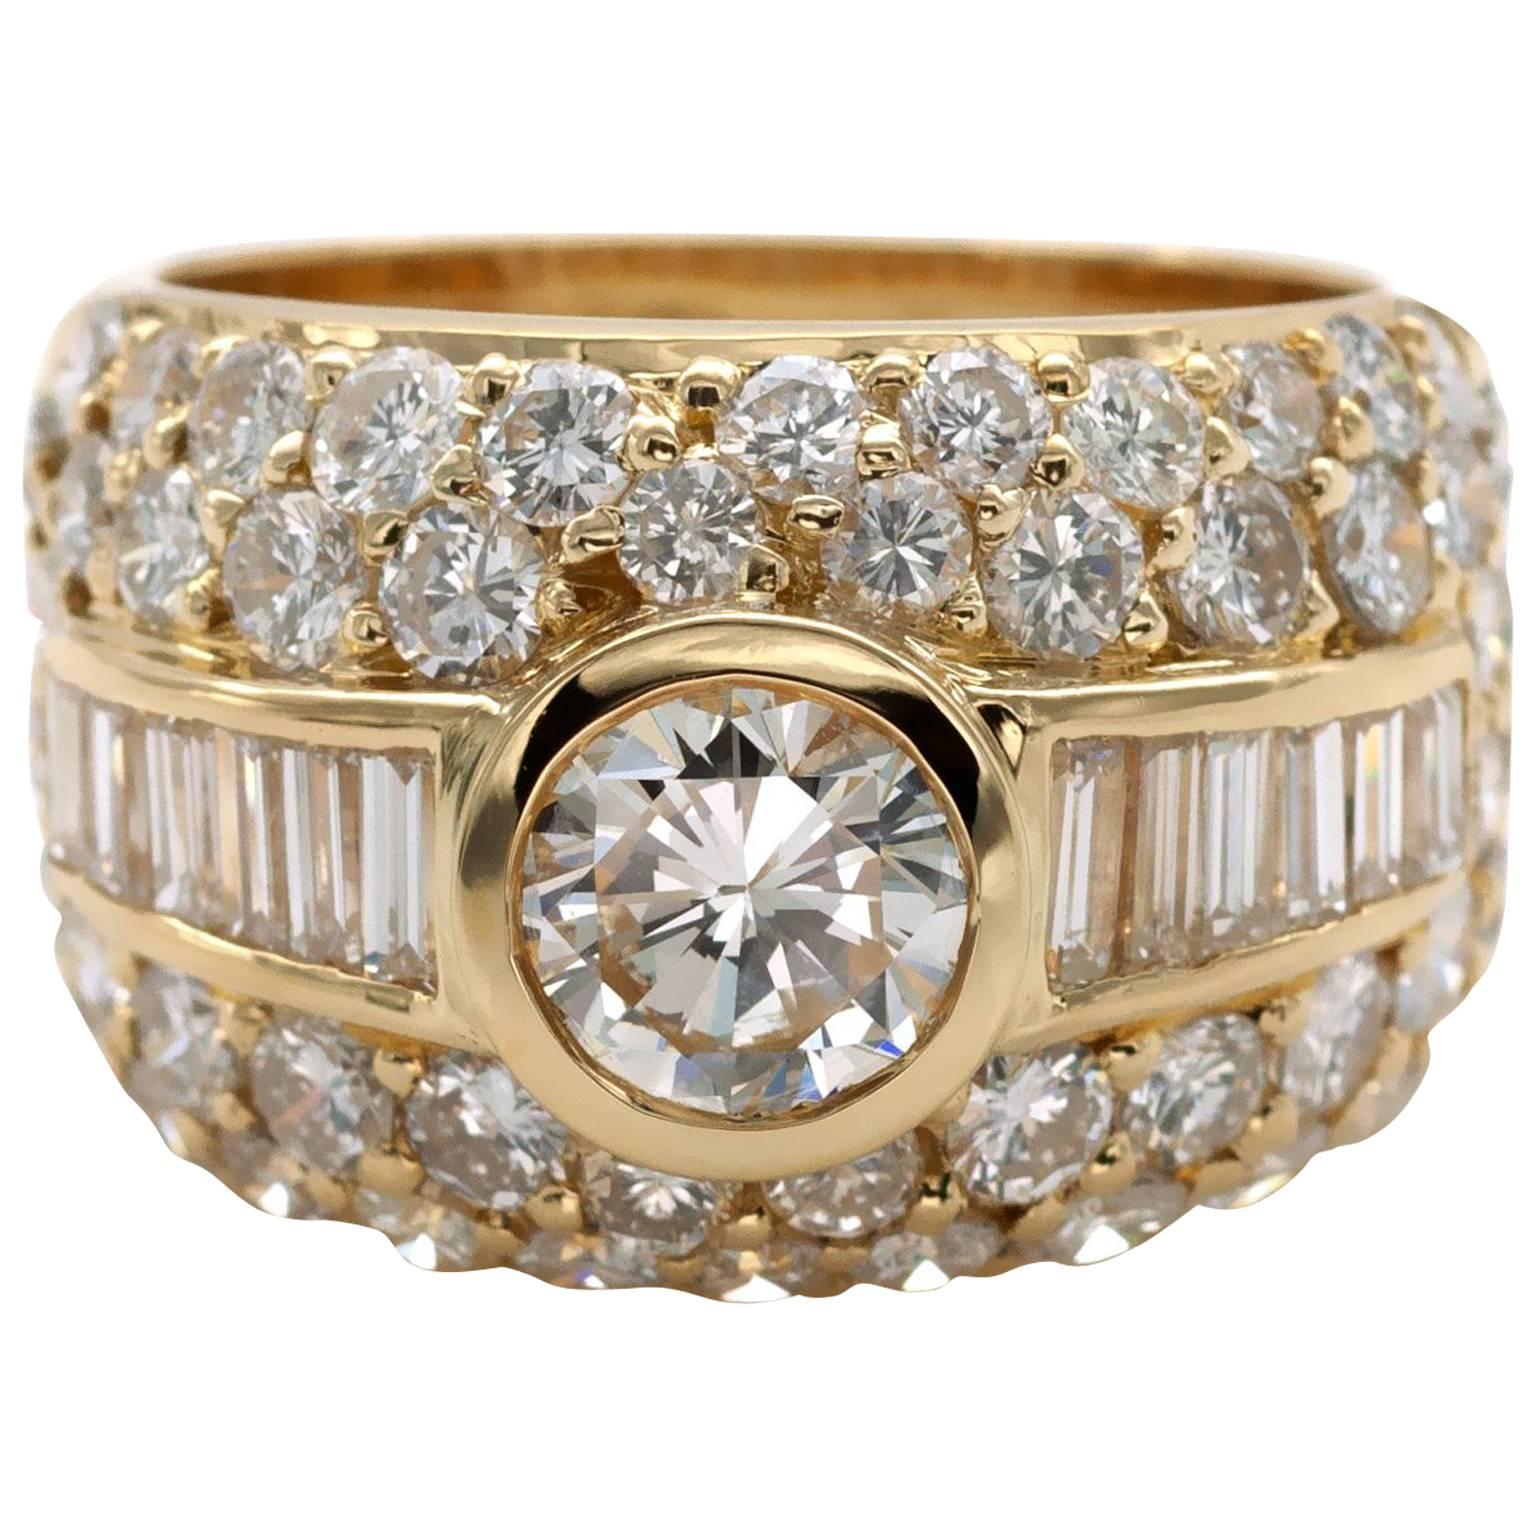 Classy cocktail ring: A genorous  18KT gold band softly domed pave set with round diamonds . In it center in a polished yellow gold frame A bezel set HRD certified center diamond and on each side of wich six bagette cut diamonds.
Center diamond :